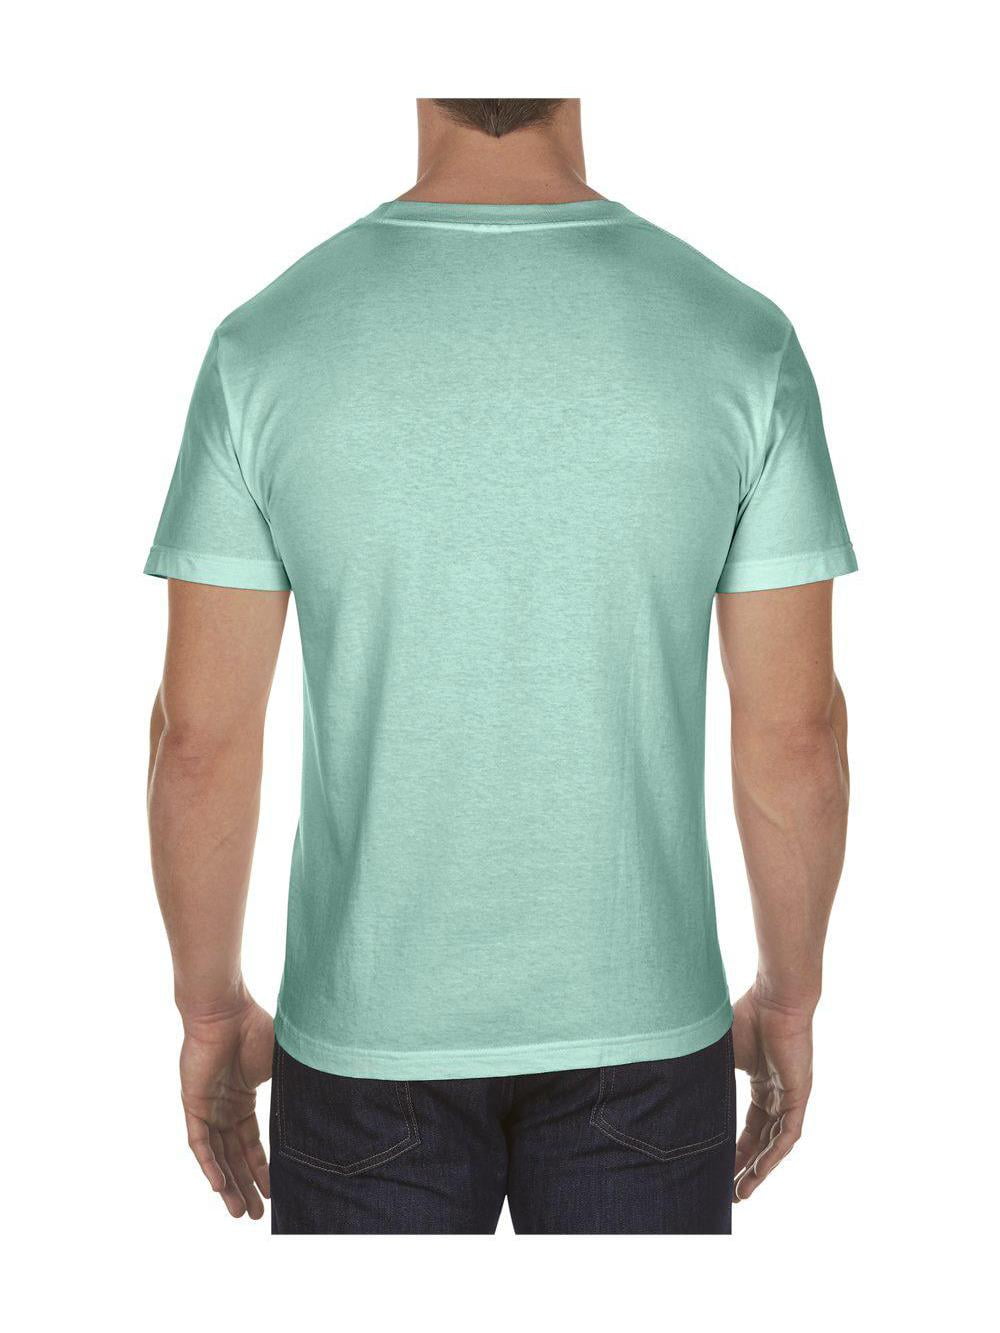 Forest 1301 S ALSTYLE Classic T-Shirt Green